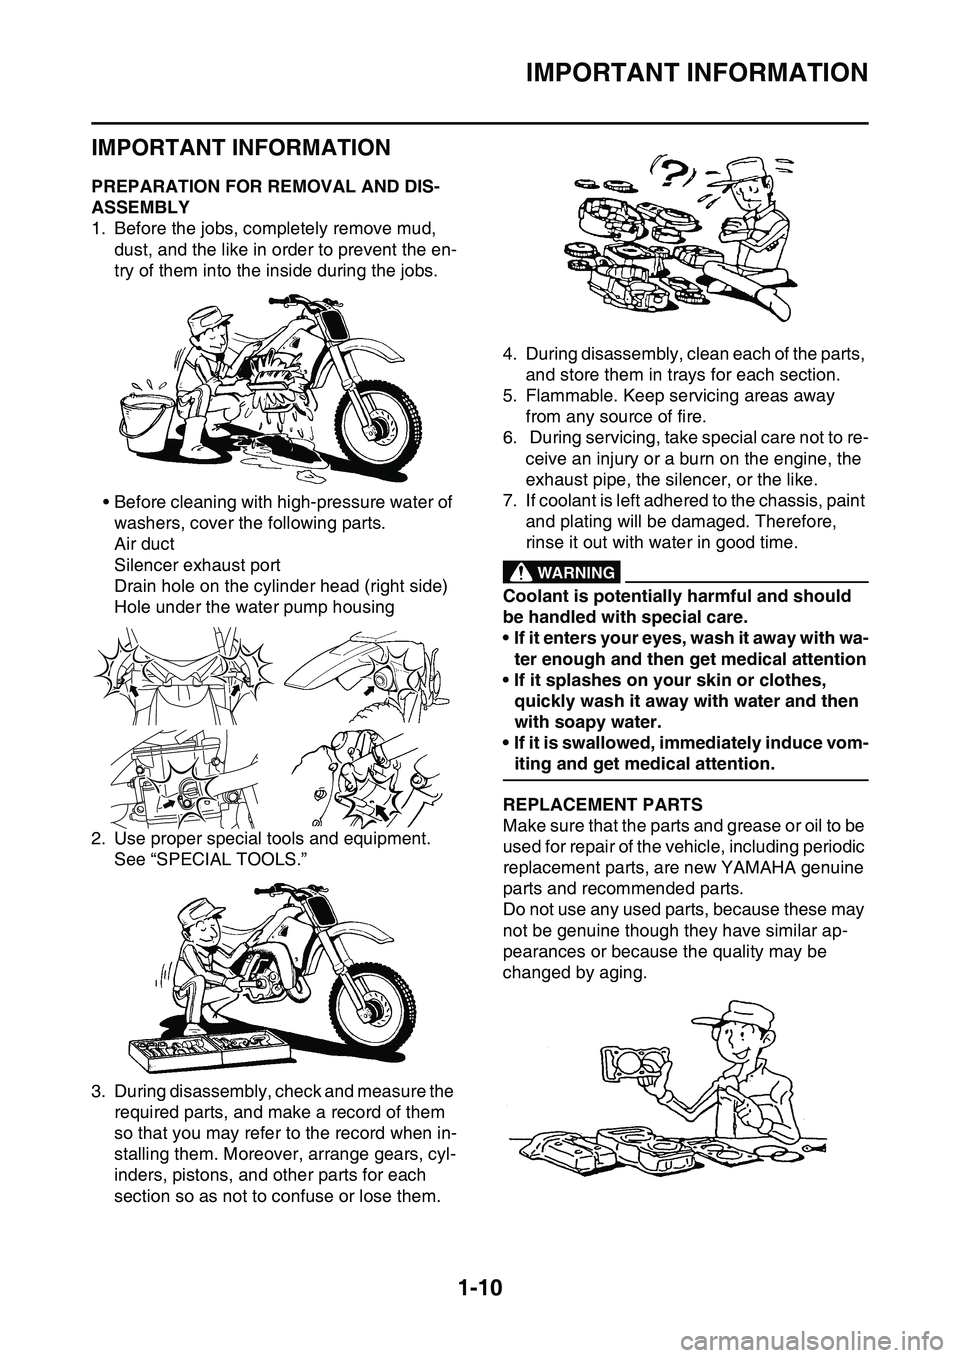 YAMAHA YZ450F 2014  Owners Manual IMPORTANT INFORMATION
1-10
EAS20180
IMPORTANT INFORMATION
EAS1SL1023PREPARATION FOR REMOVAL AND DIS-
ASSEMBLY
1. Before the jobs, completely remove mud, 
dust, and the like in order to prevent the en
